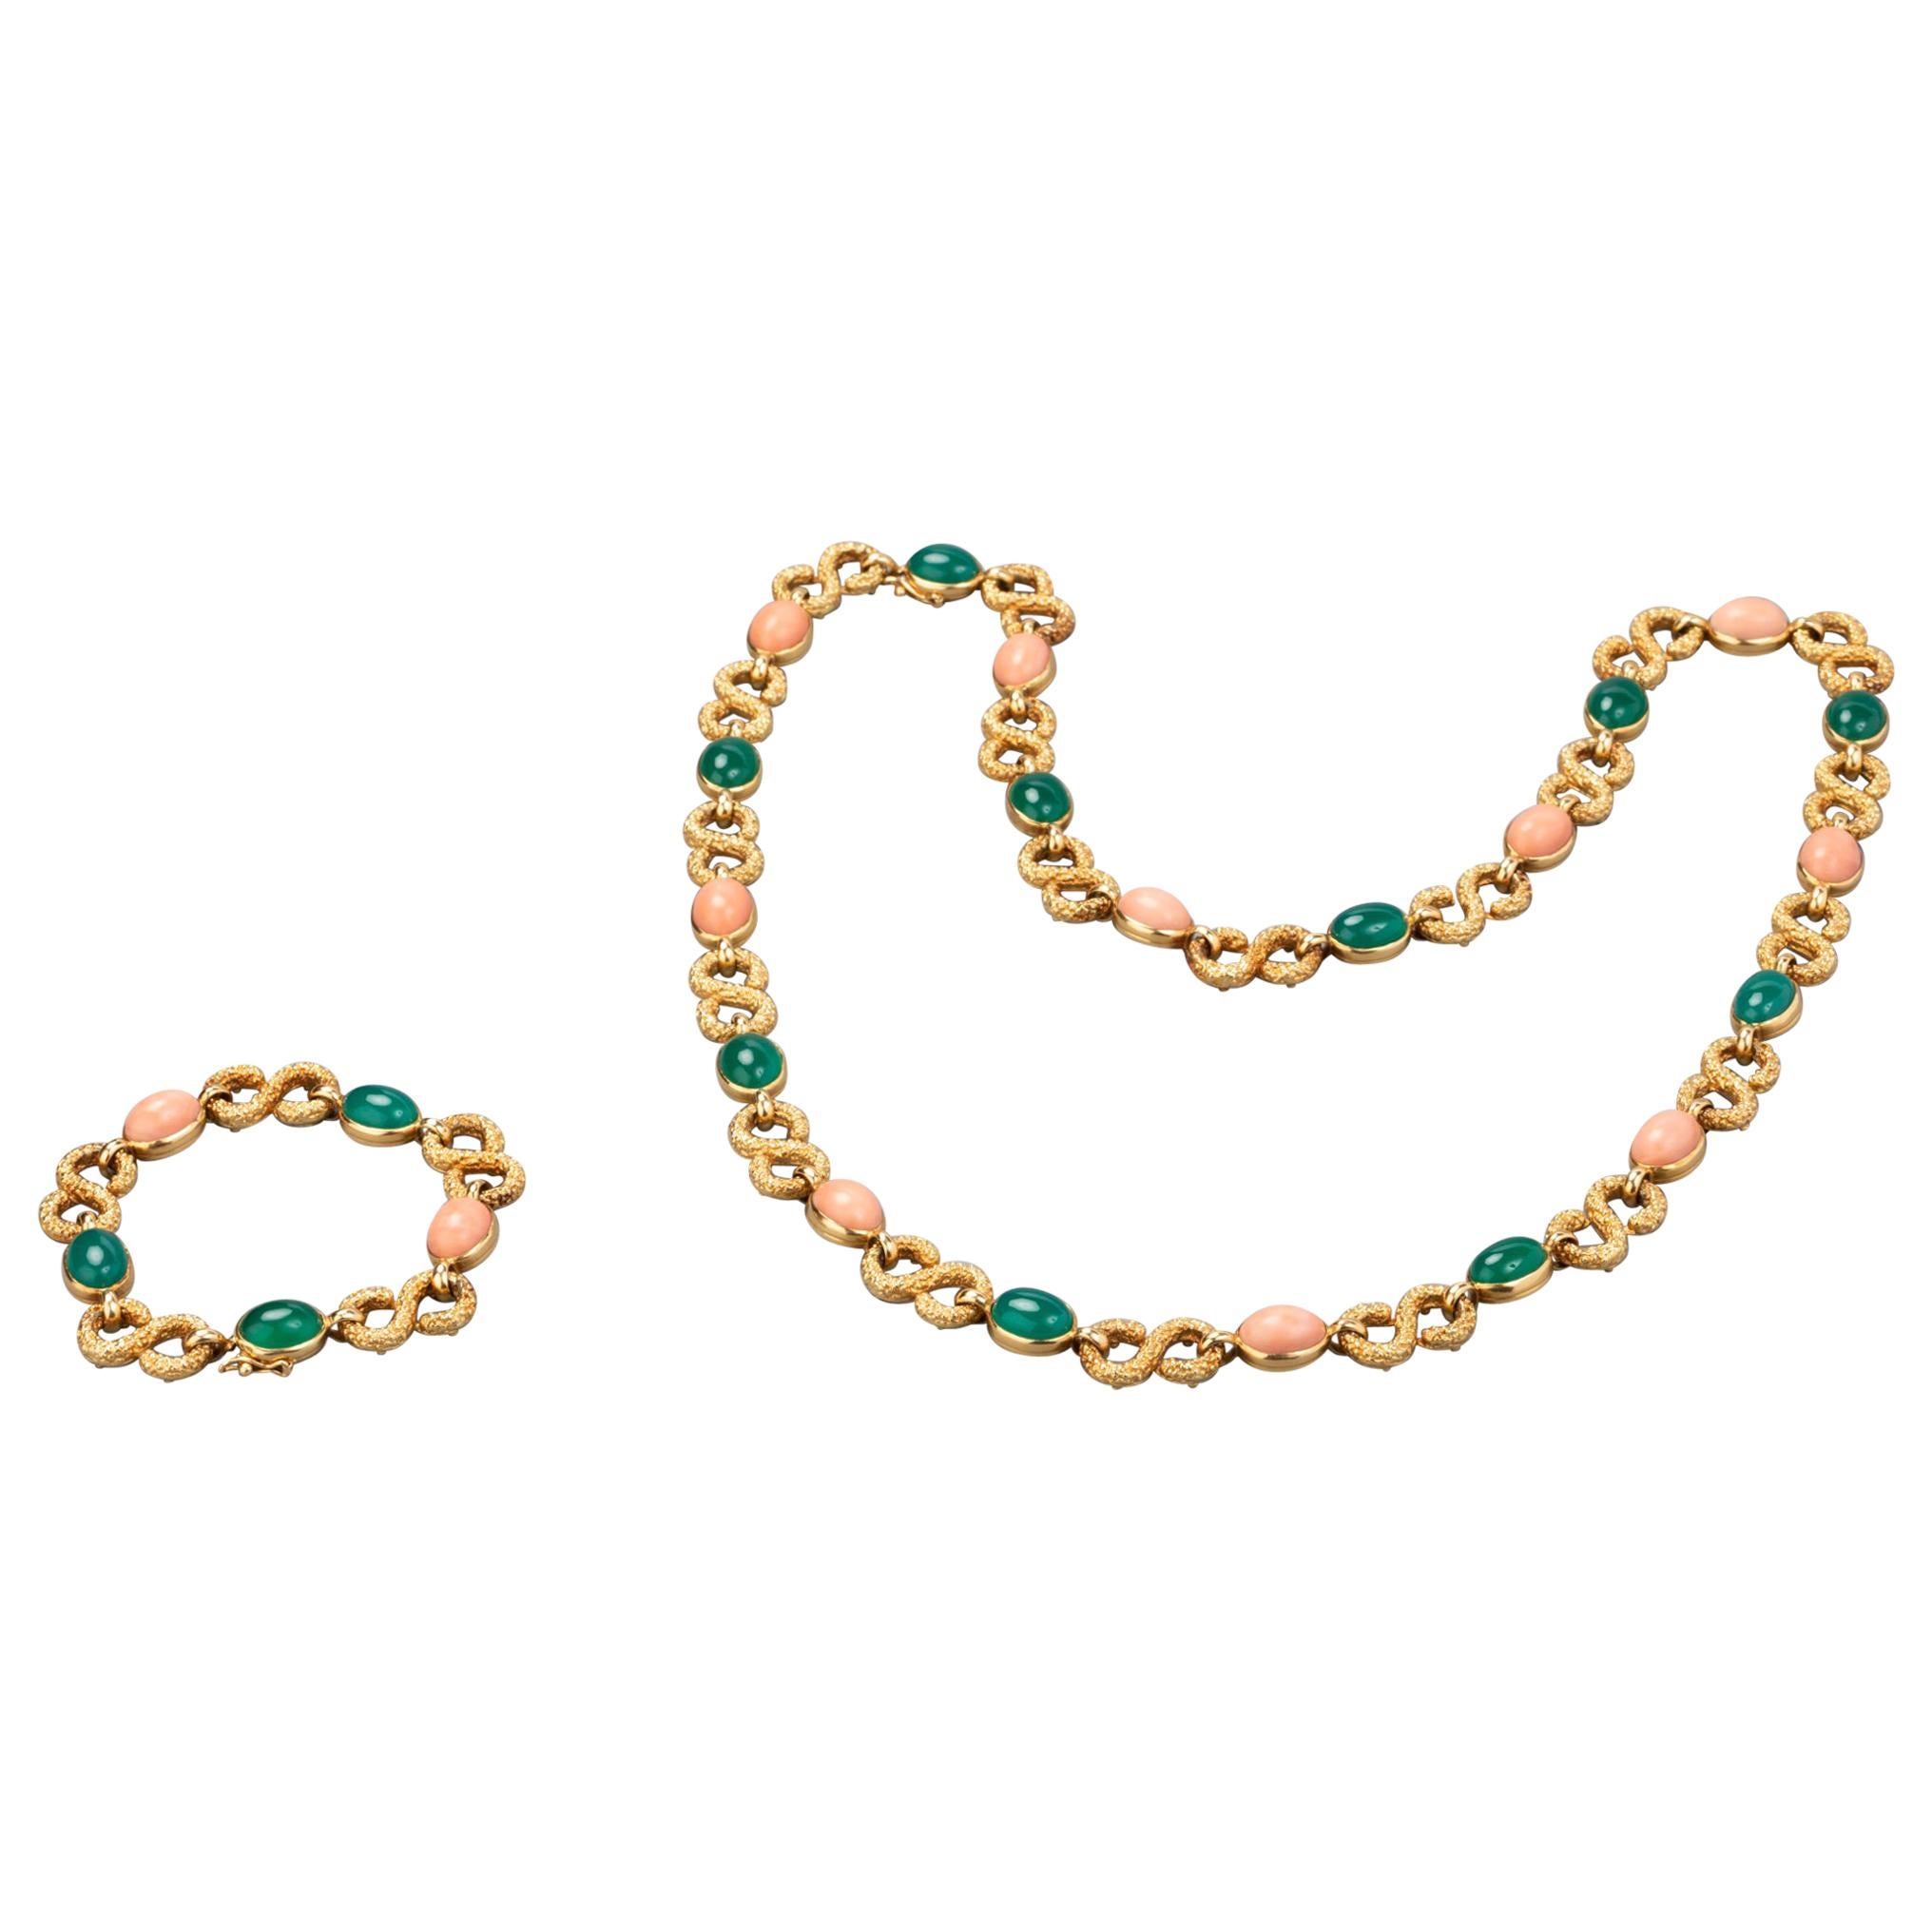 French Gold Coral and Agate Necklace and Bracelet Set